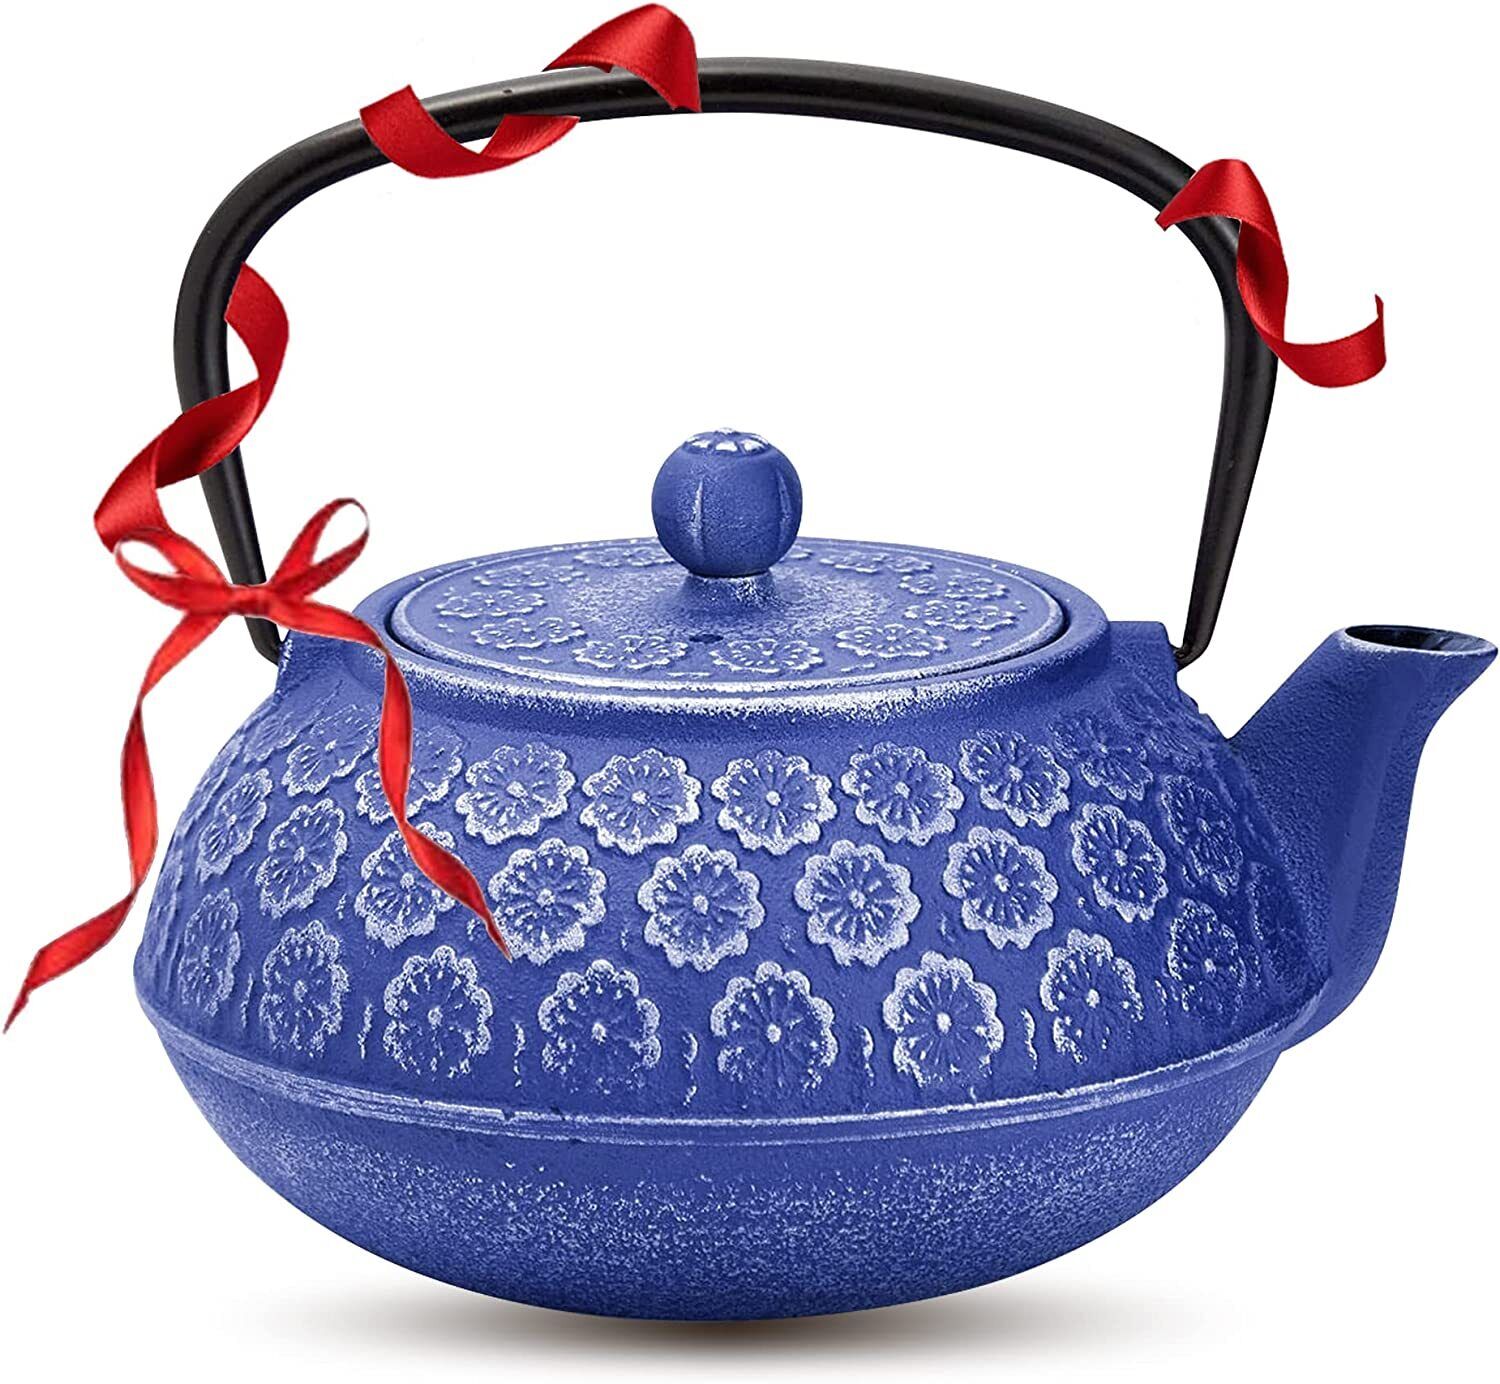 Japanese Cast Iron Tea Kettle Blue Pot with Stainless Steel Infuser 32 Oz / 1L